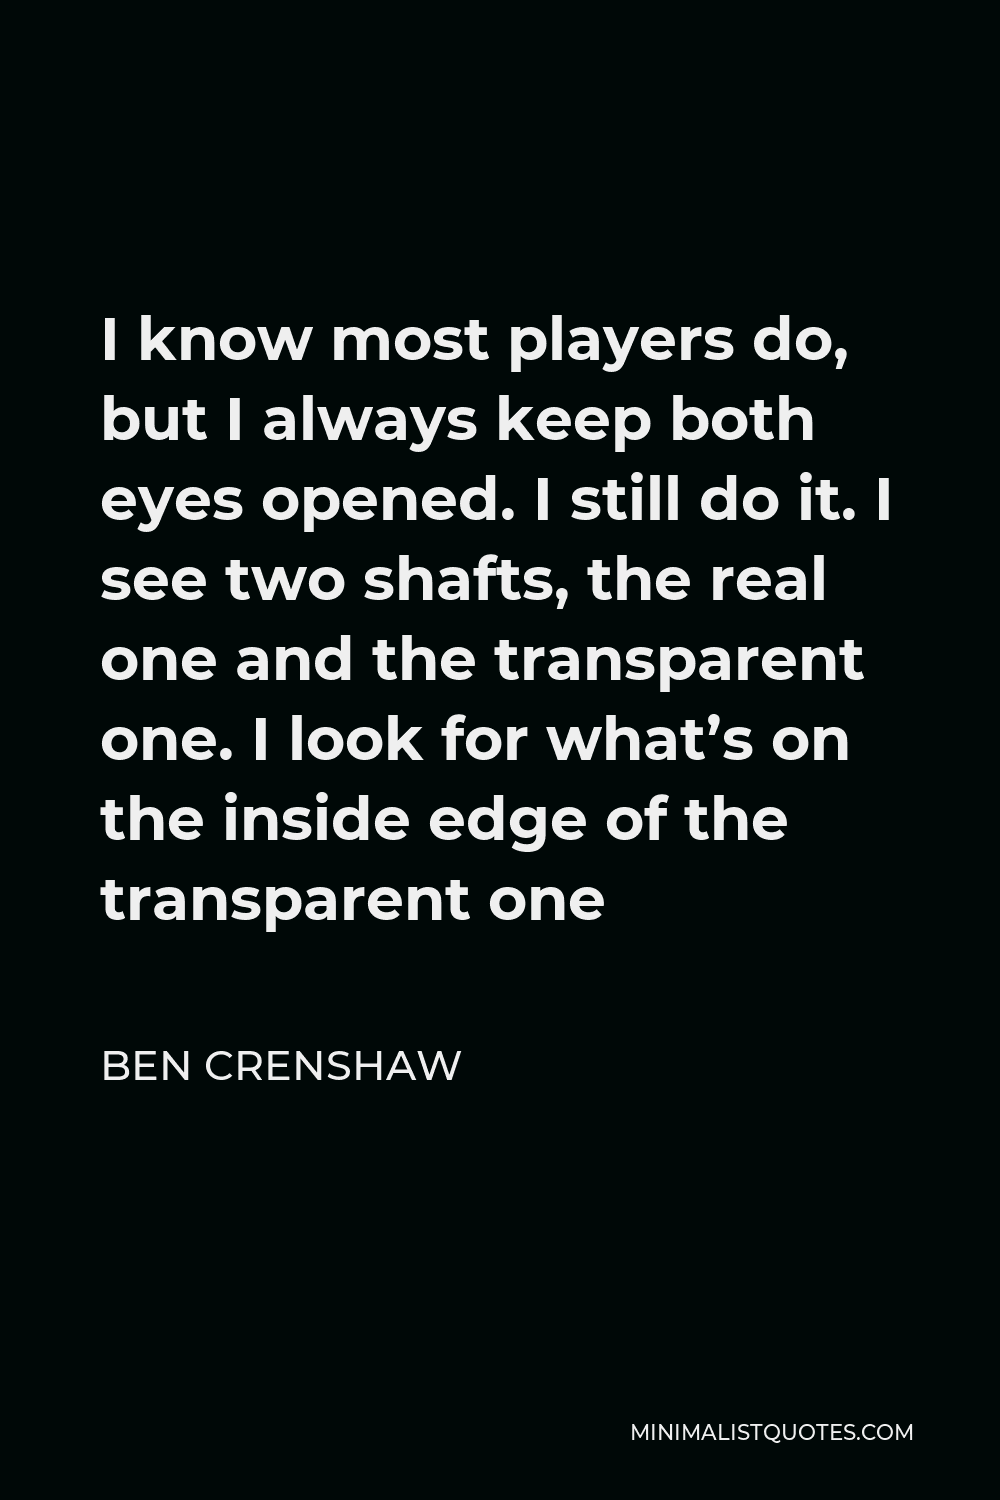 Ben Crenshaw Quote - I know most players do, but I always keep both eyes opened. I still do it. I see two shafts, the real one and the transparent one. I look for what’s on the inside edge of the transparent one